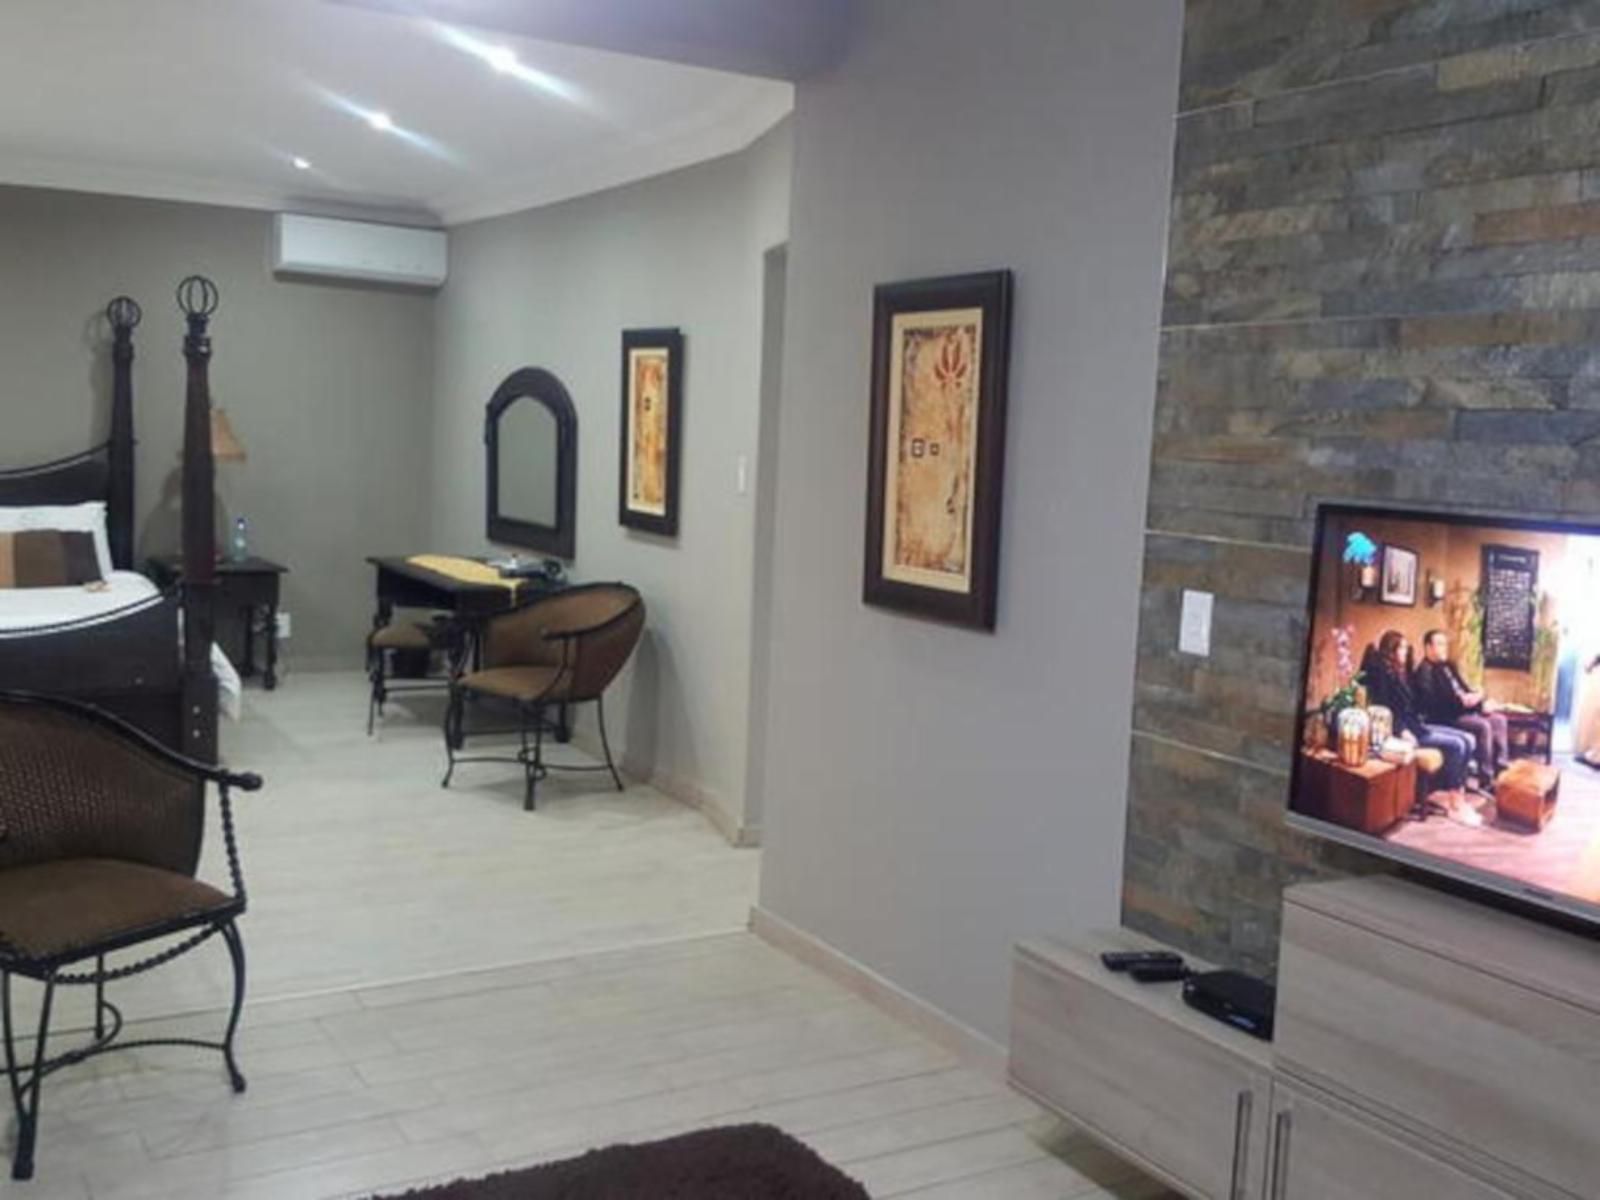 Fa Trez Guest House And Spa Faerie Glen Pretoria Tshwane Gauteng South Africa Unsaturated, Living Room, Picture Frame, Art